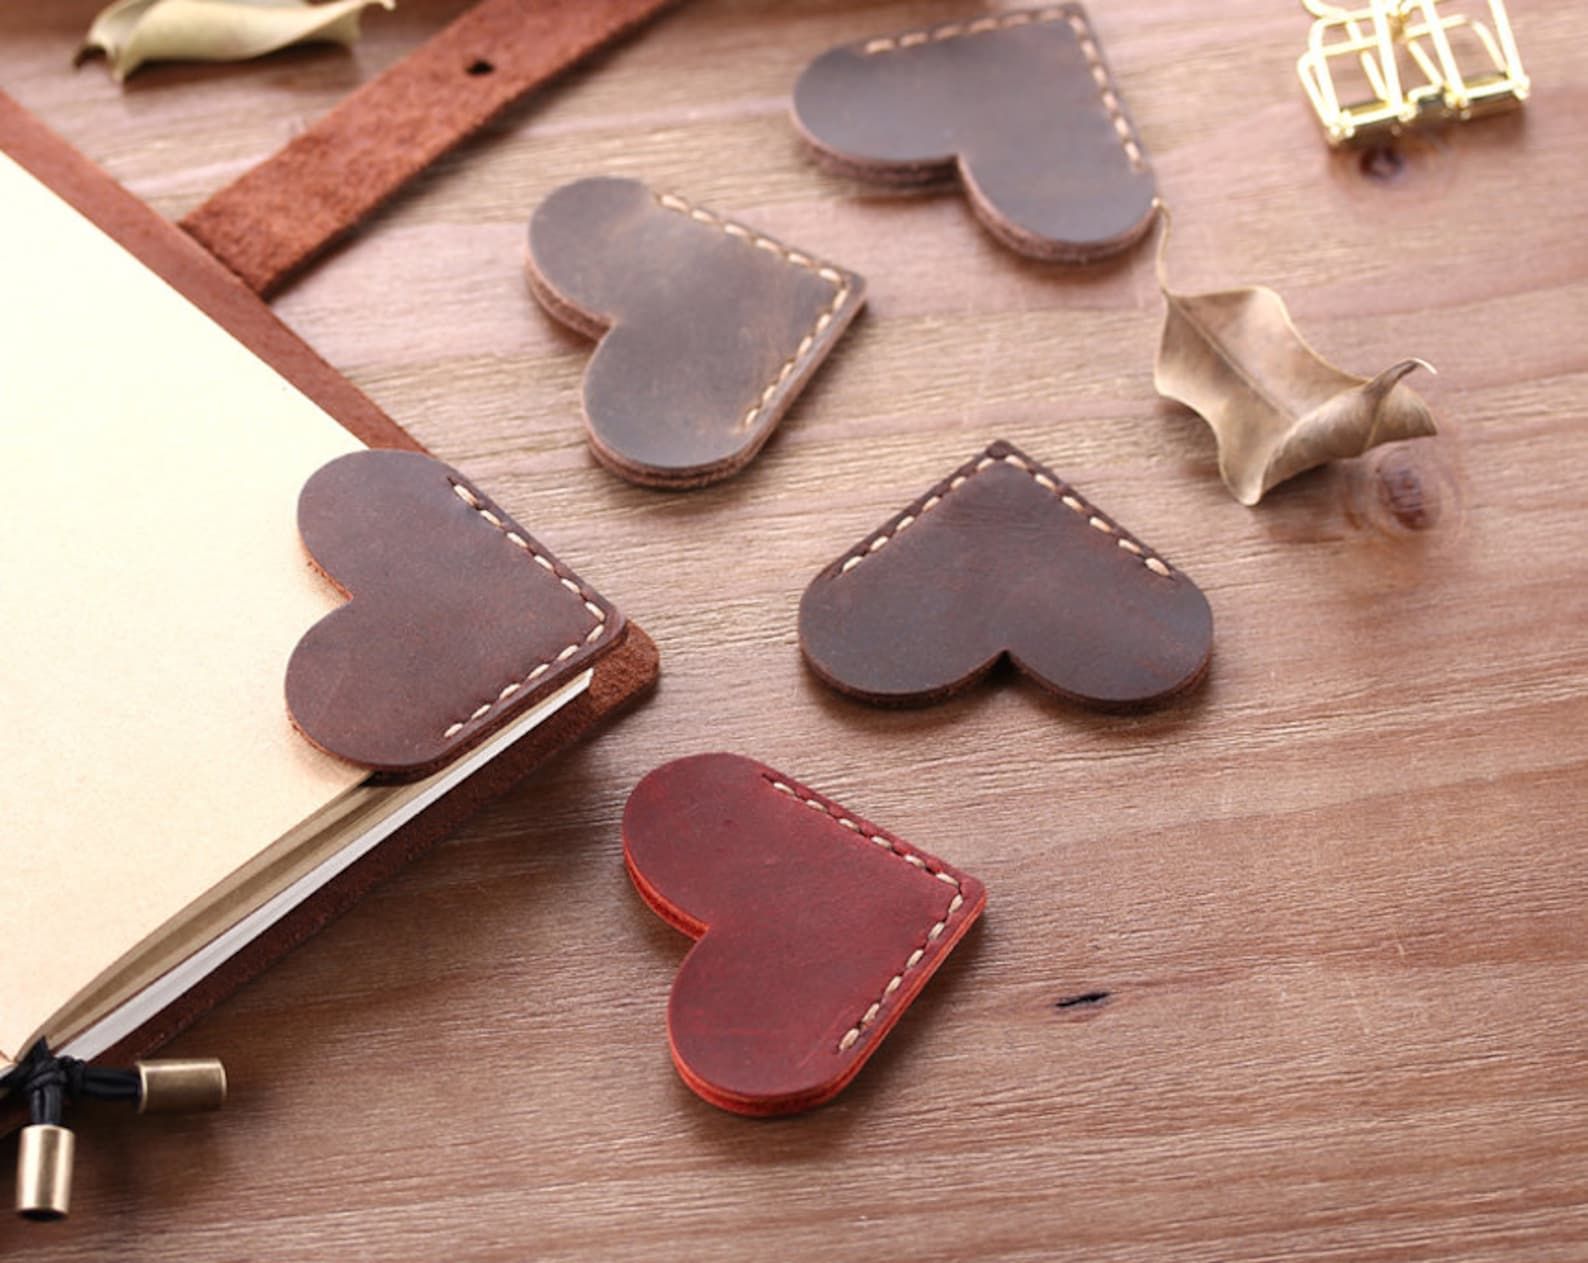 A collection of leather hearts stitched together at the point and used as corner bookmarks.